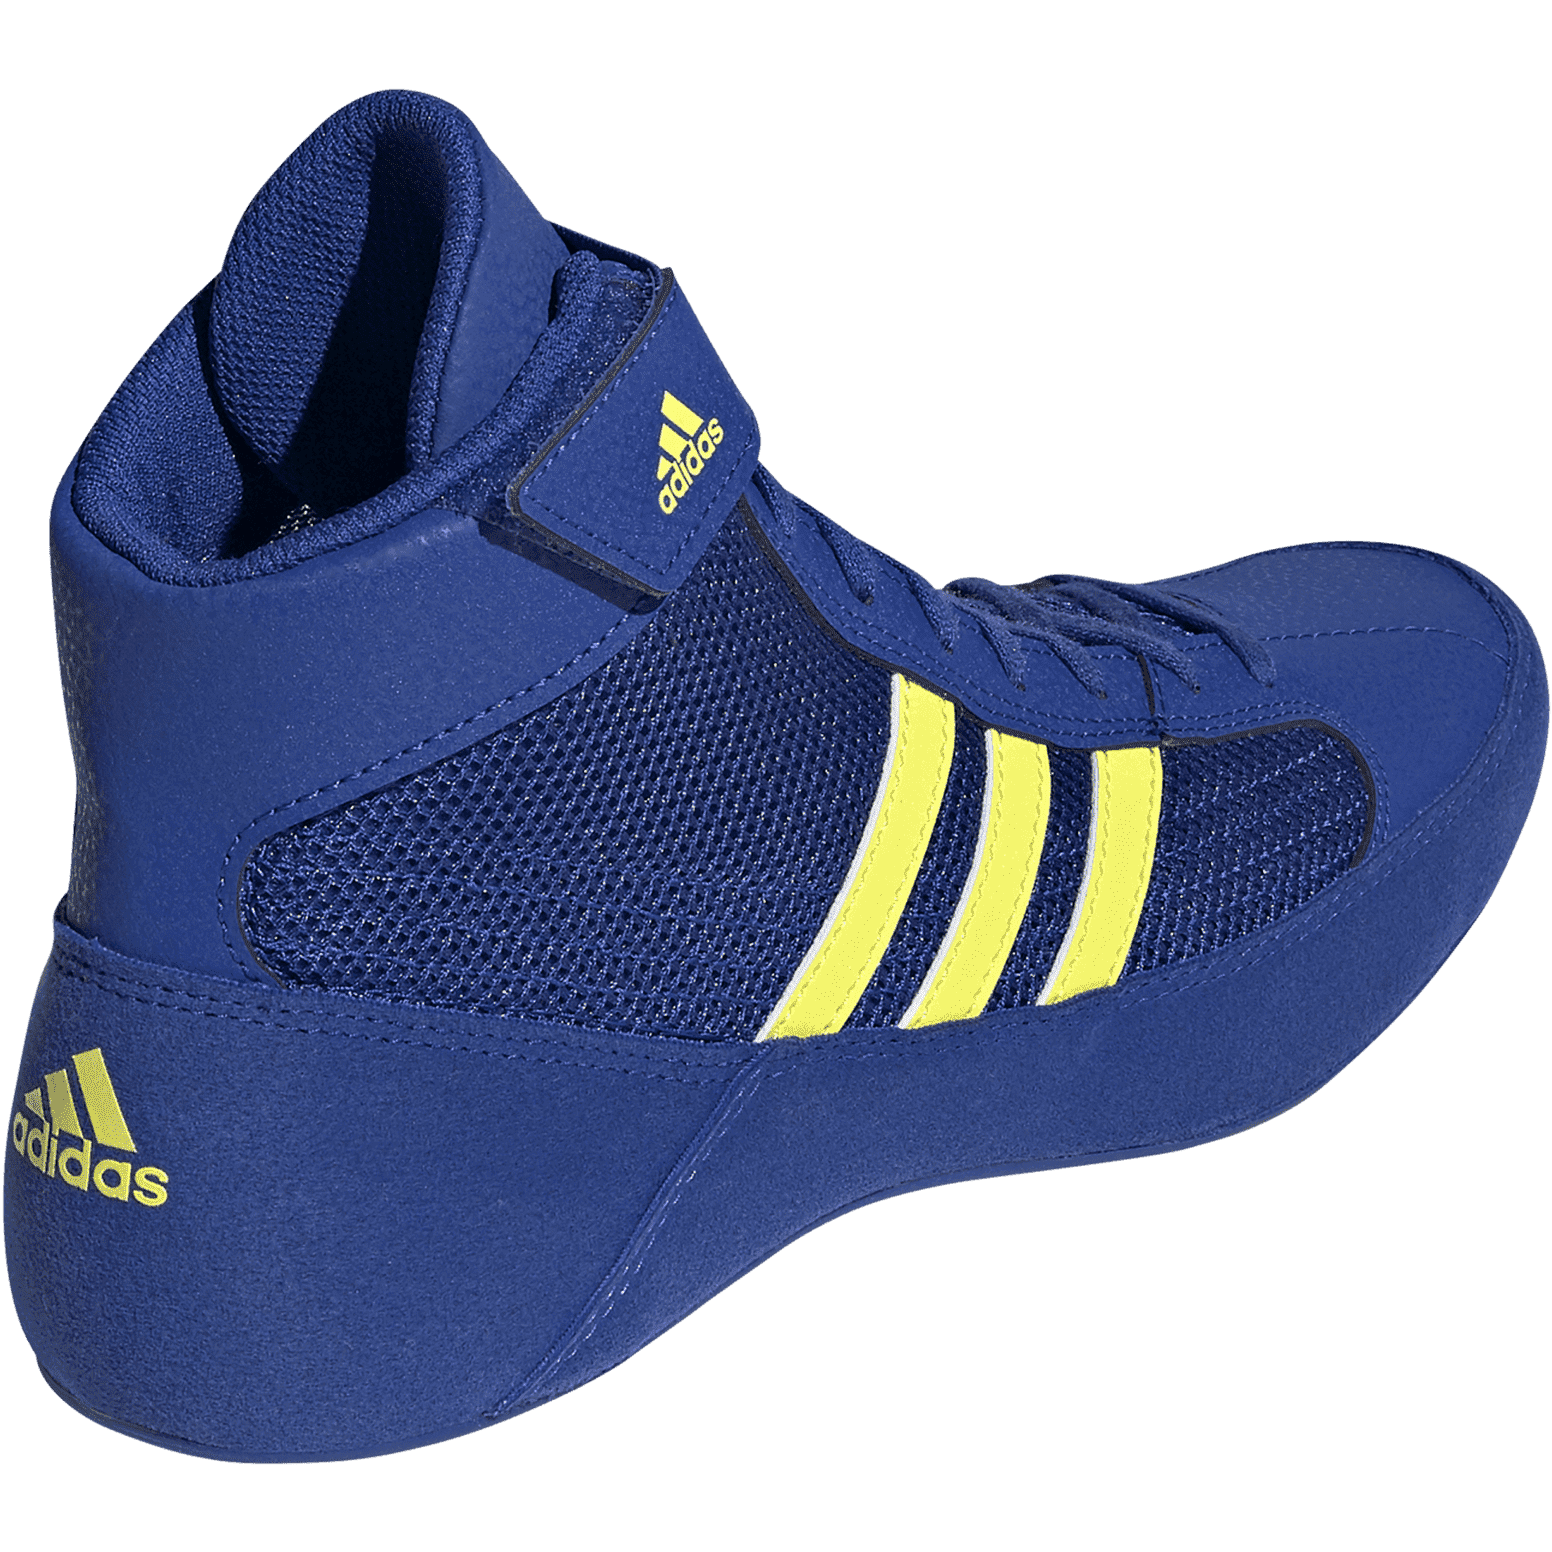 Adidas 222 HVC 2 Youth Laced Wrestling Shoes - Royal Solar Yellow